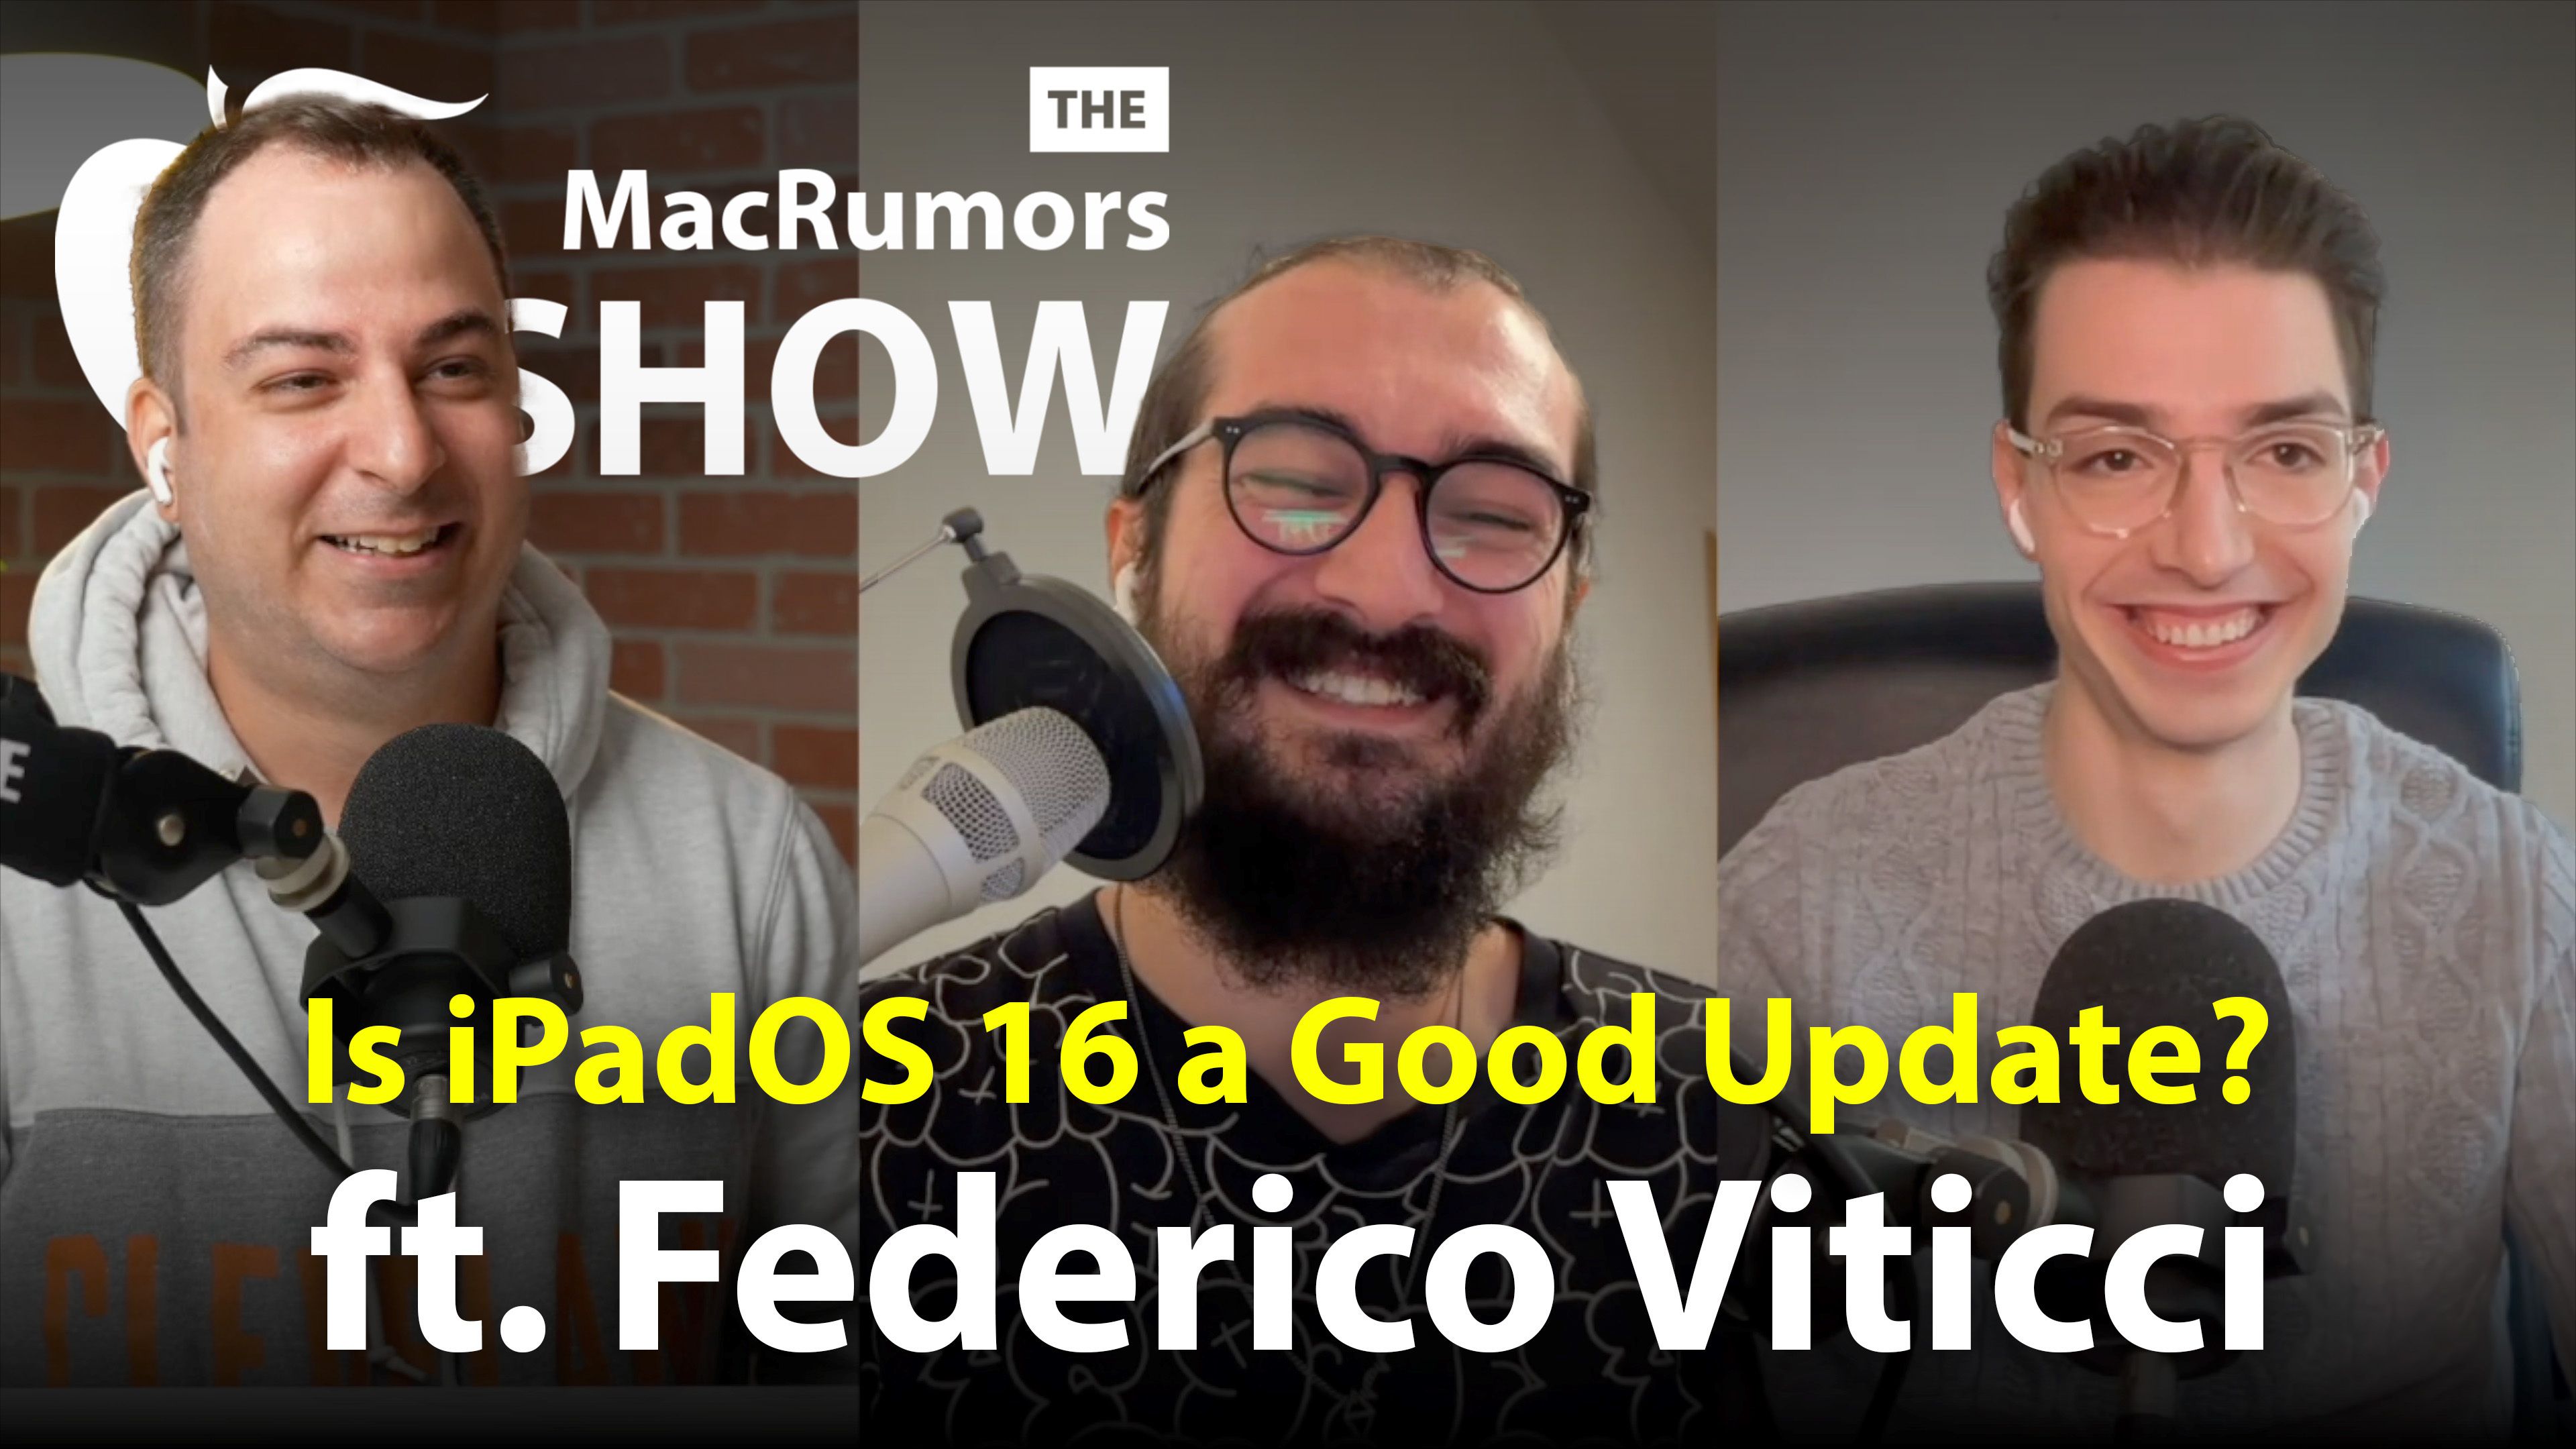 The MacRumors Show: Is iPadOS 16 a Good Update? ft. Federico Viticci